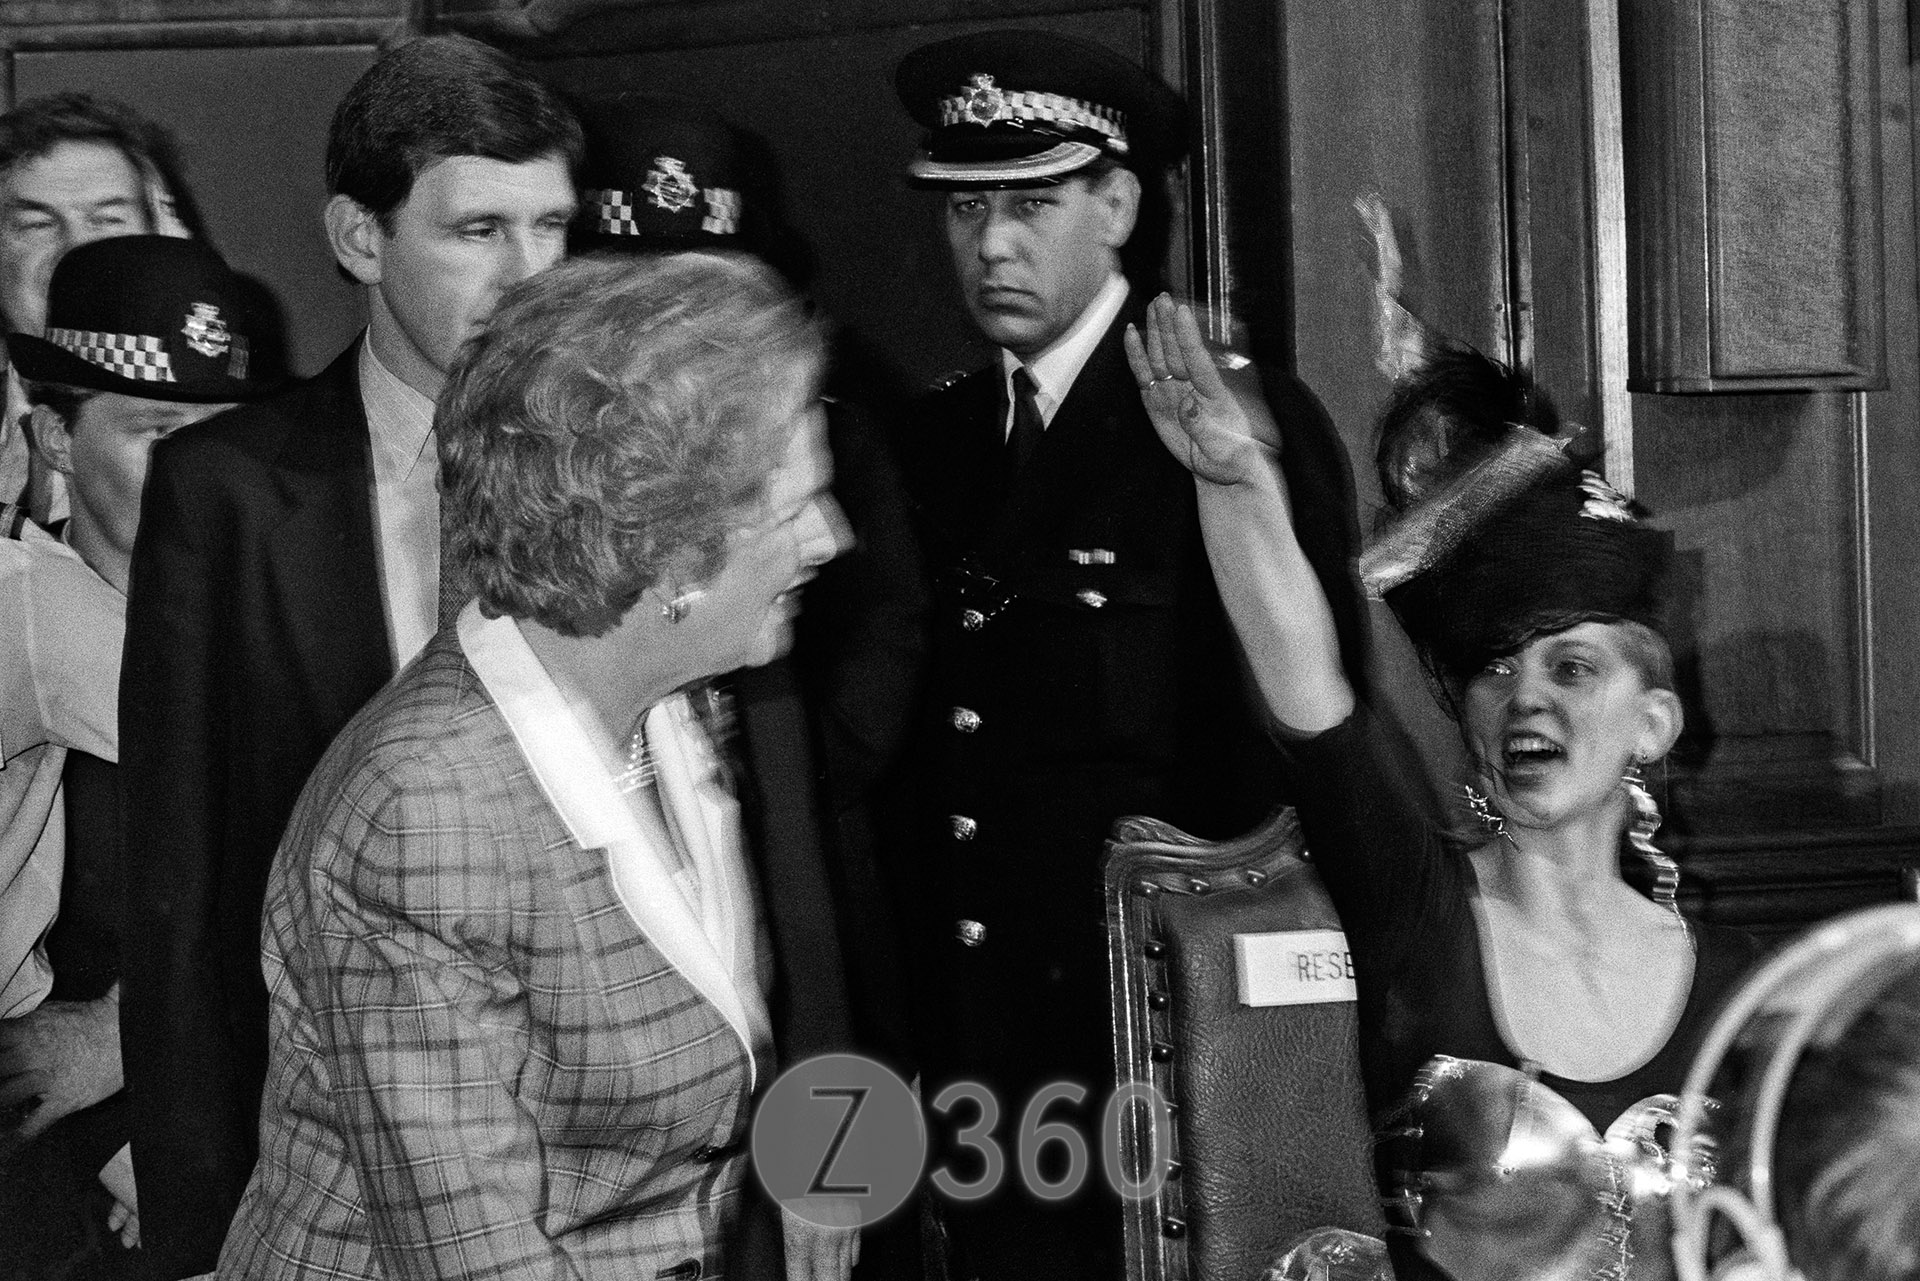 Margaret Thatcher enters to a Nazi salute